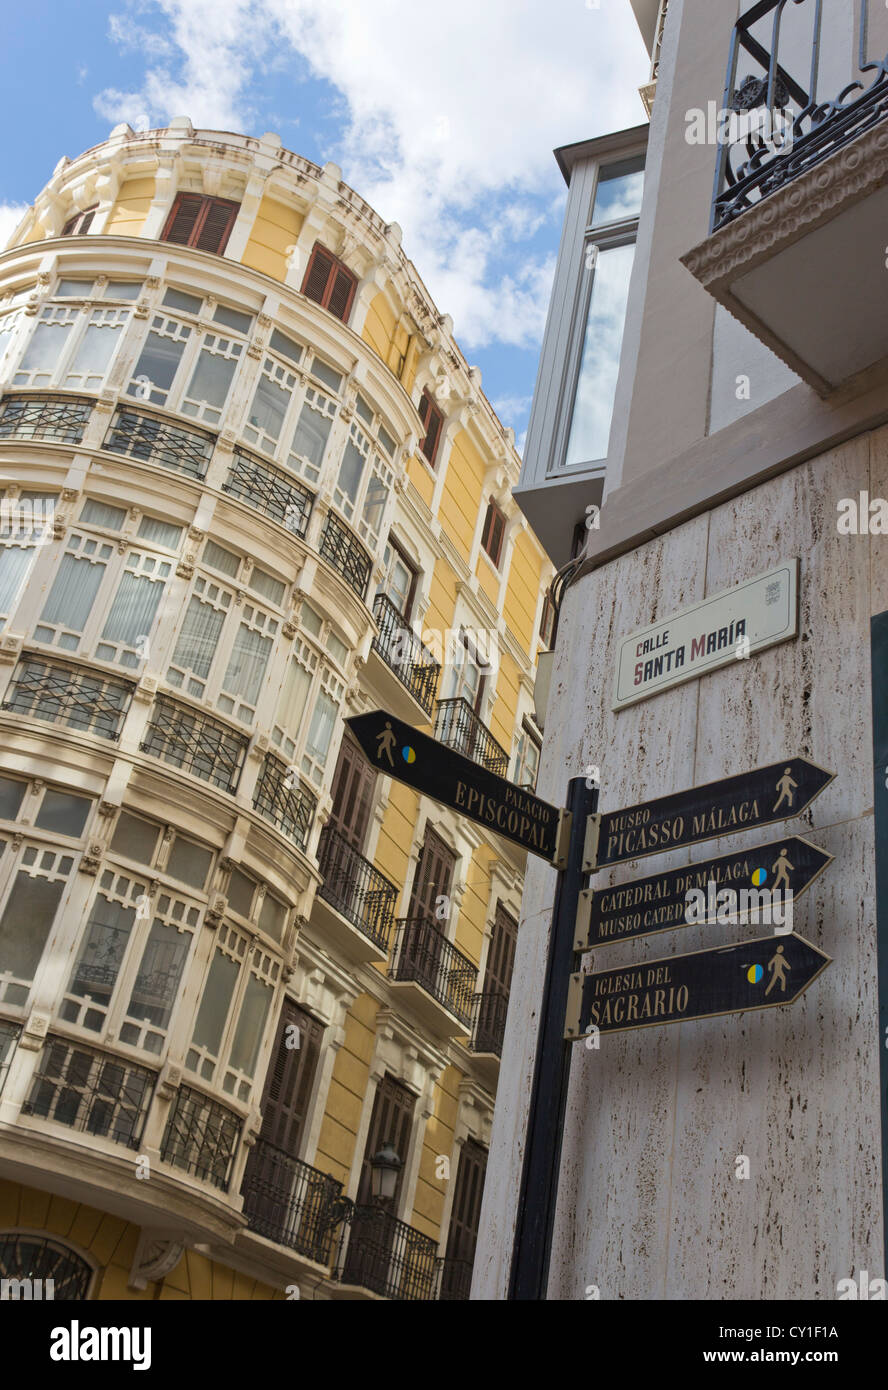 Malaga, Costa del Sol, Andalucia, Spain. Street signs with directions to the tourist sites Malaga cathedral and  Picasso Museum Stock Photo